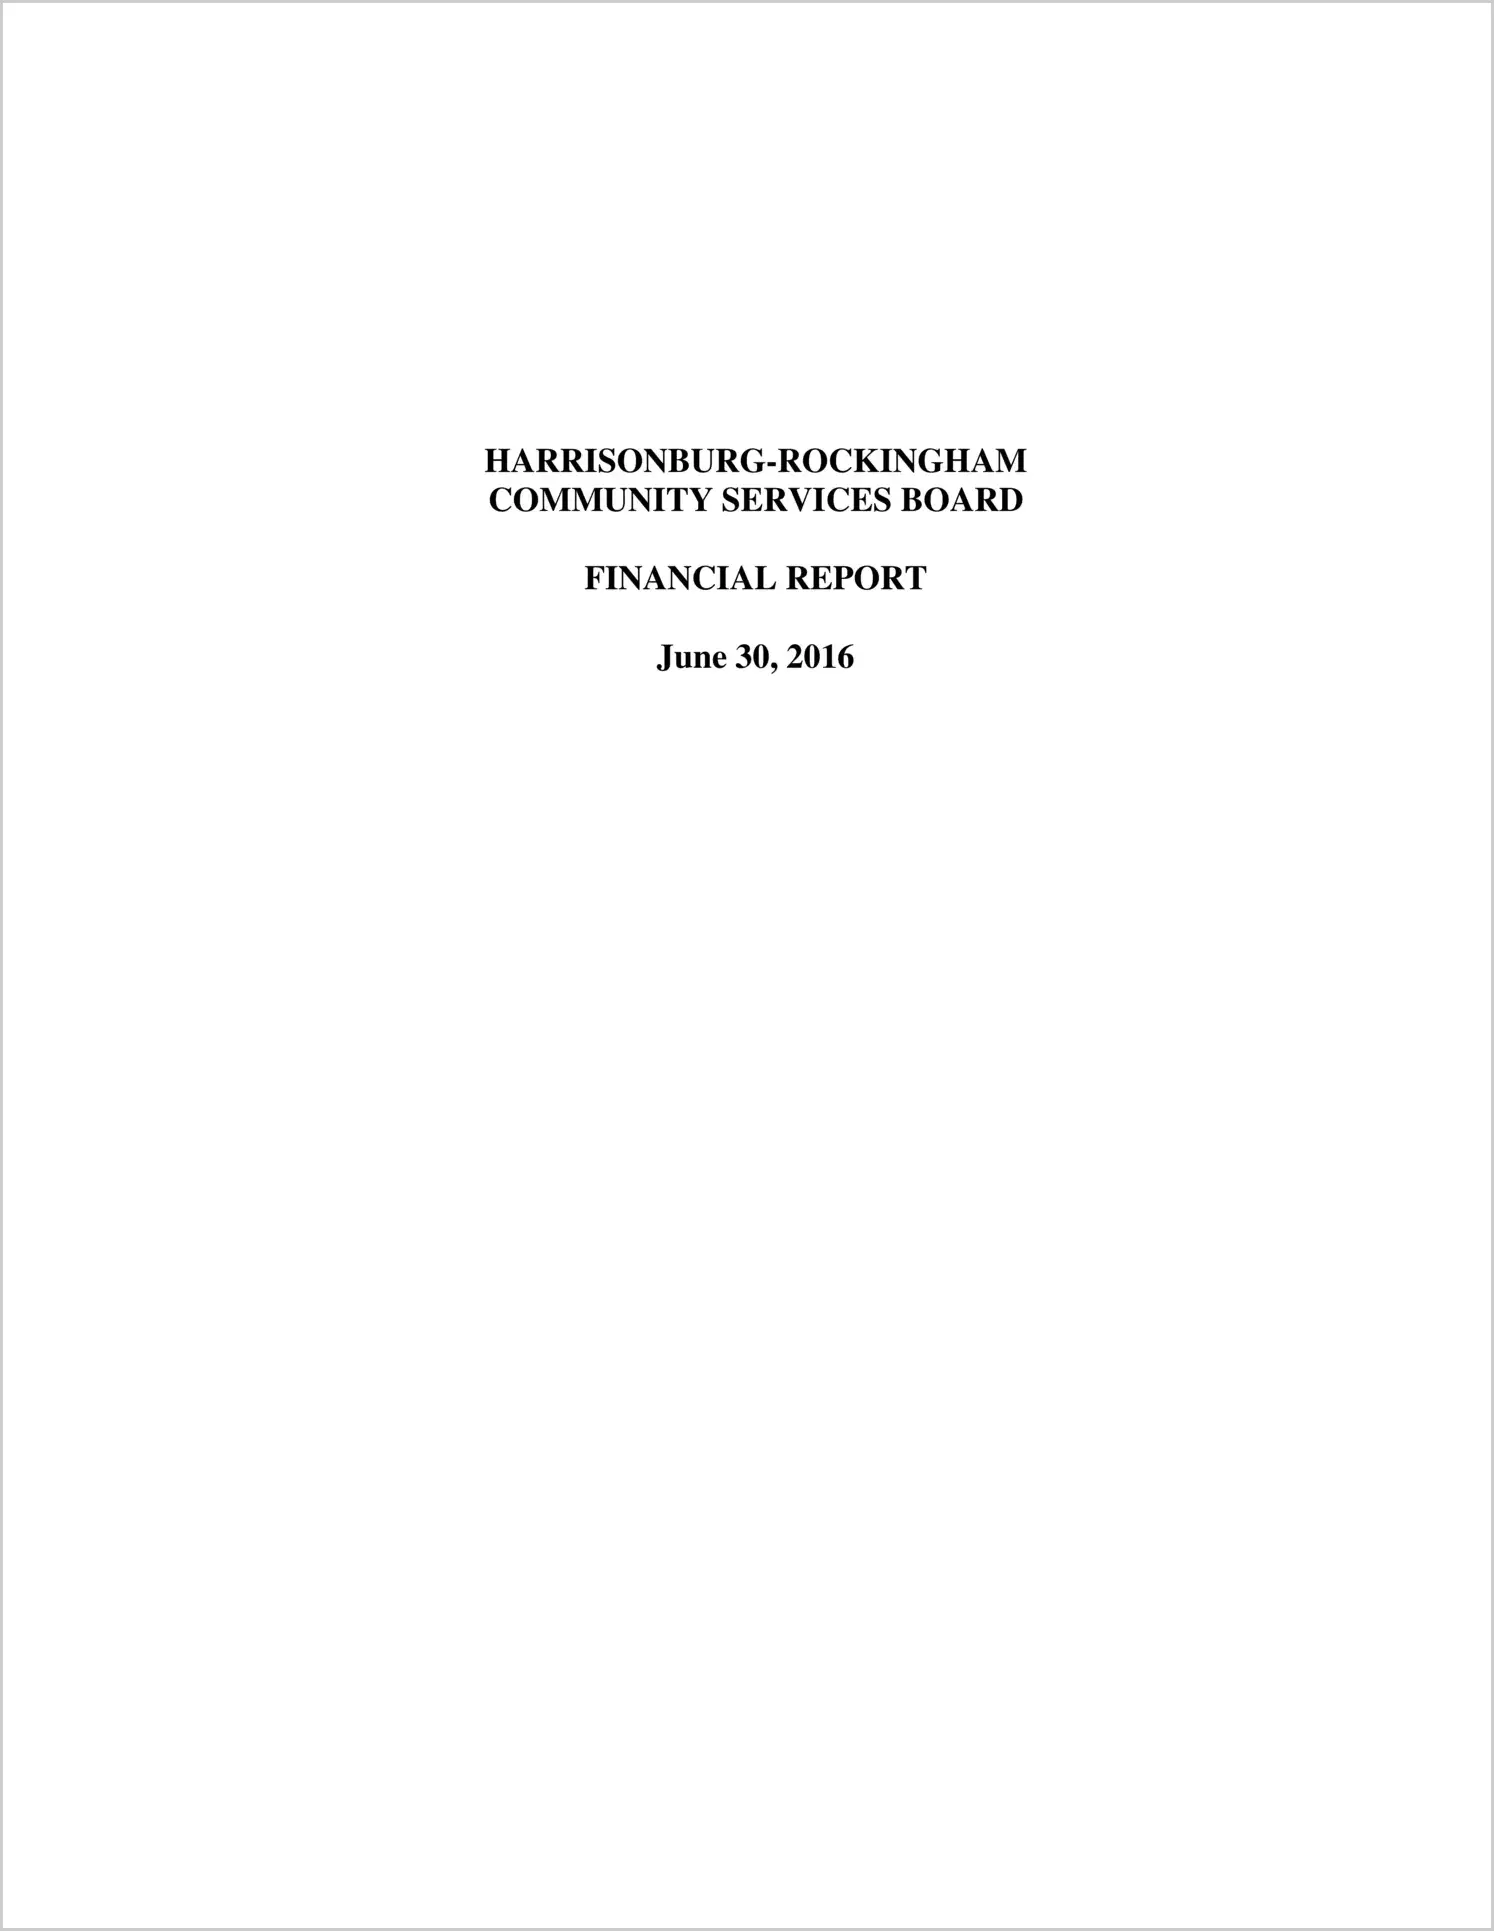 2016 ABC/Other Annual Financial Report  for Harrisonburg-Rockingham Community Services Board